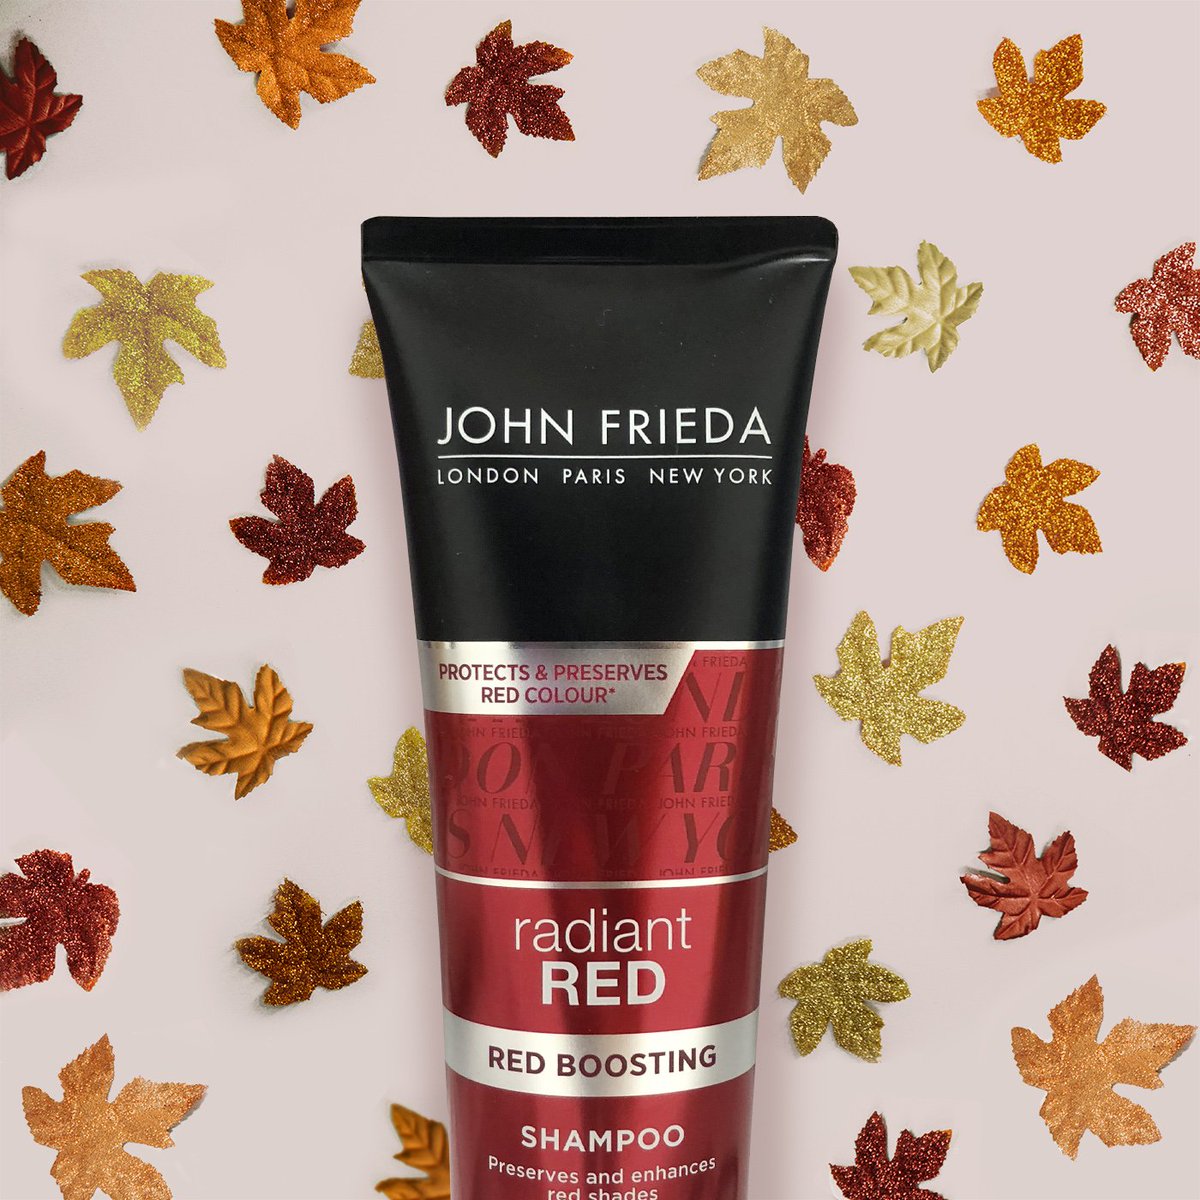 John Frieda Us On Twitter For 30 Years We Ve Made It Our Mission